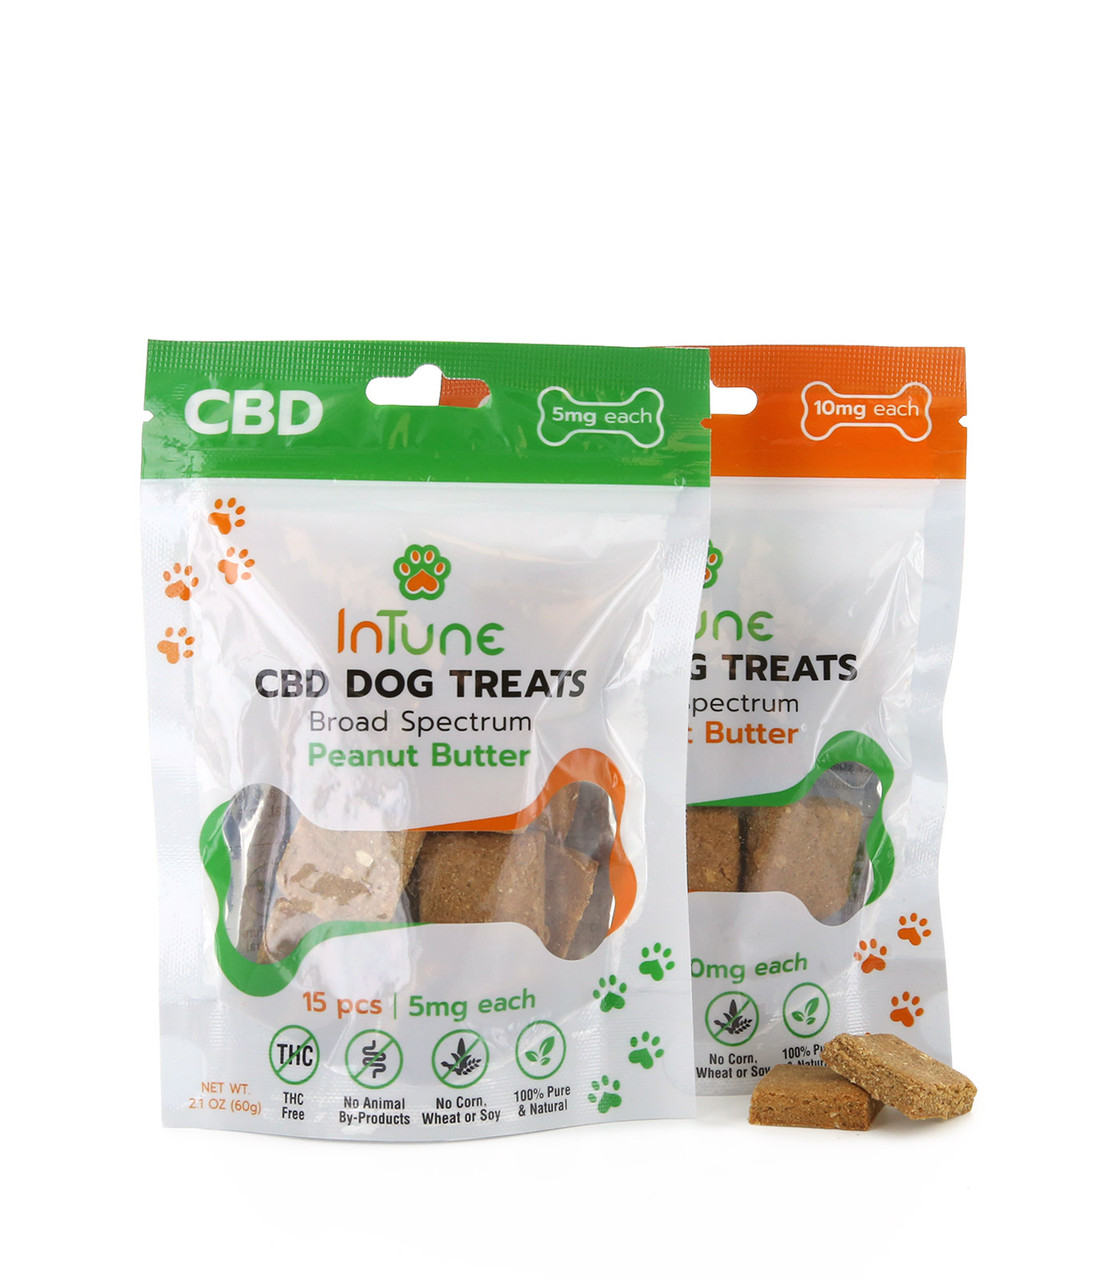 Tailored Tranquility: The Secret of CBD Treats for Dogs